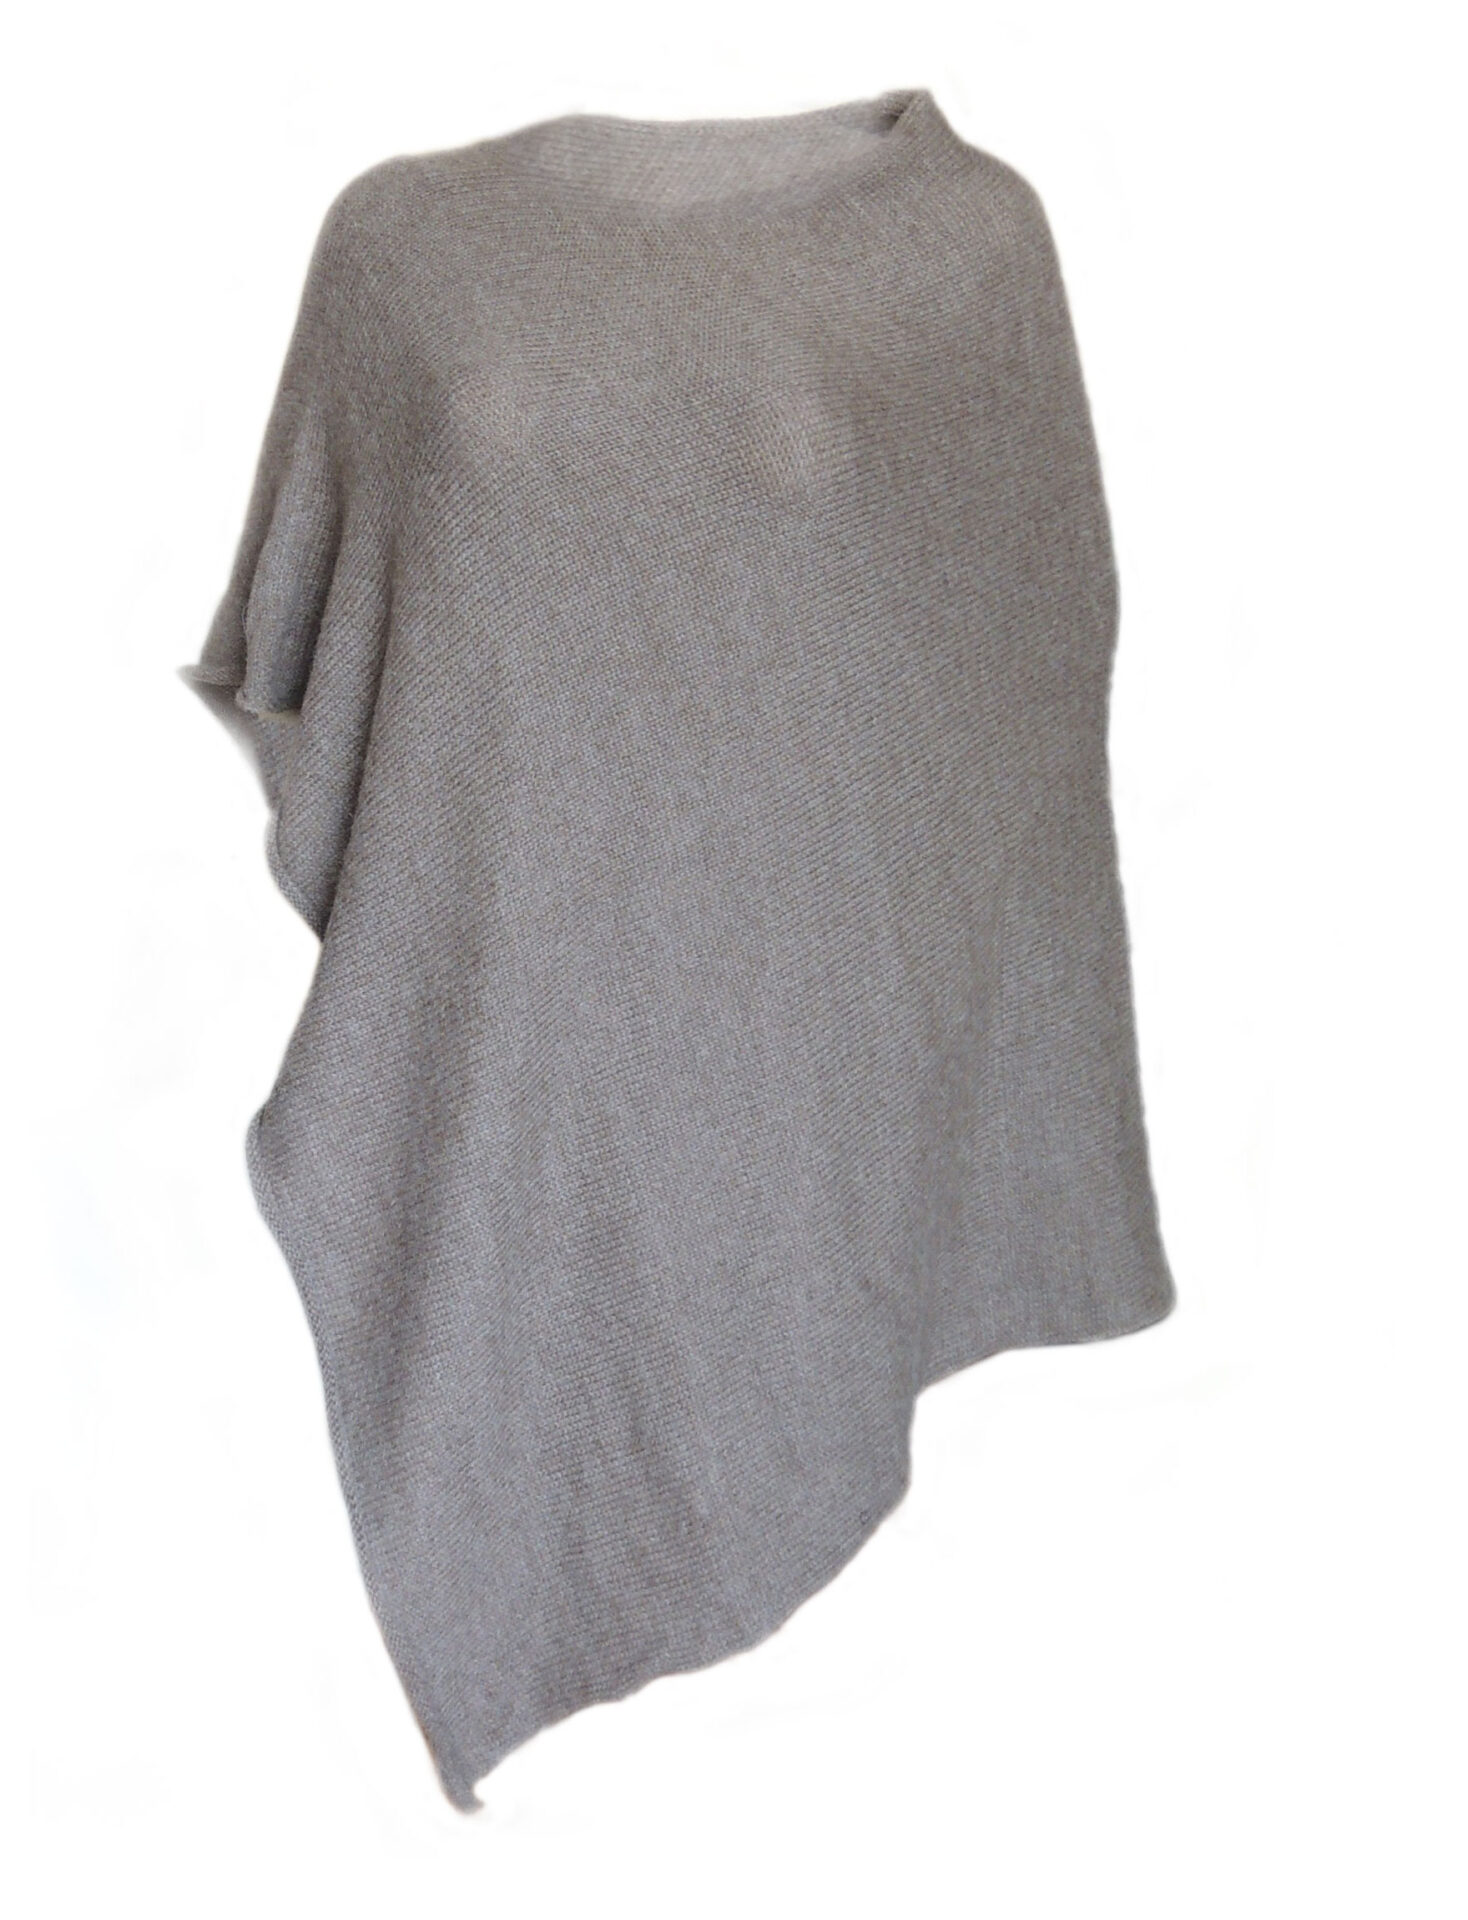 PFL knits, asymmetric poncho with a round neckline in solid color. 100% alpaca